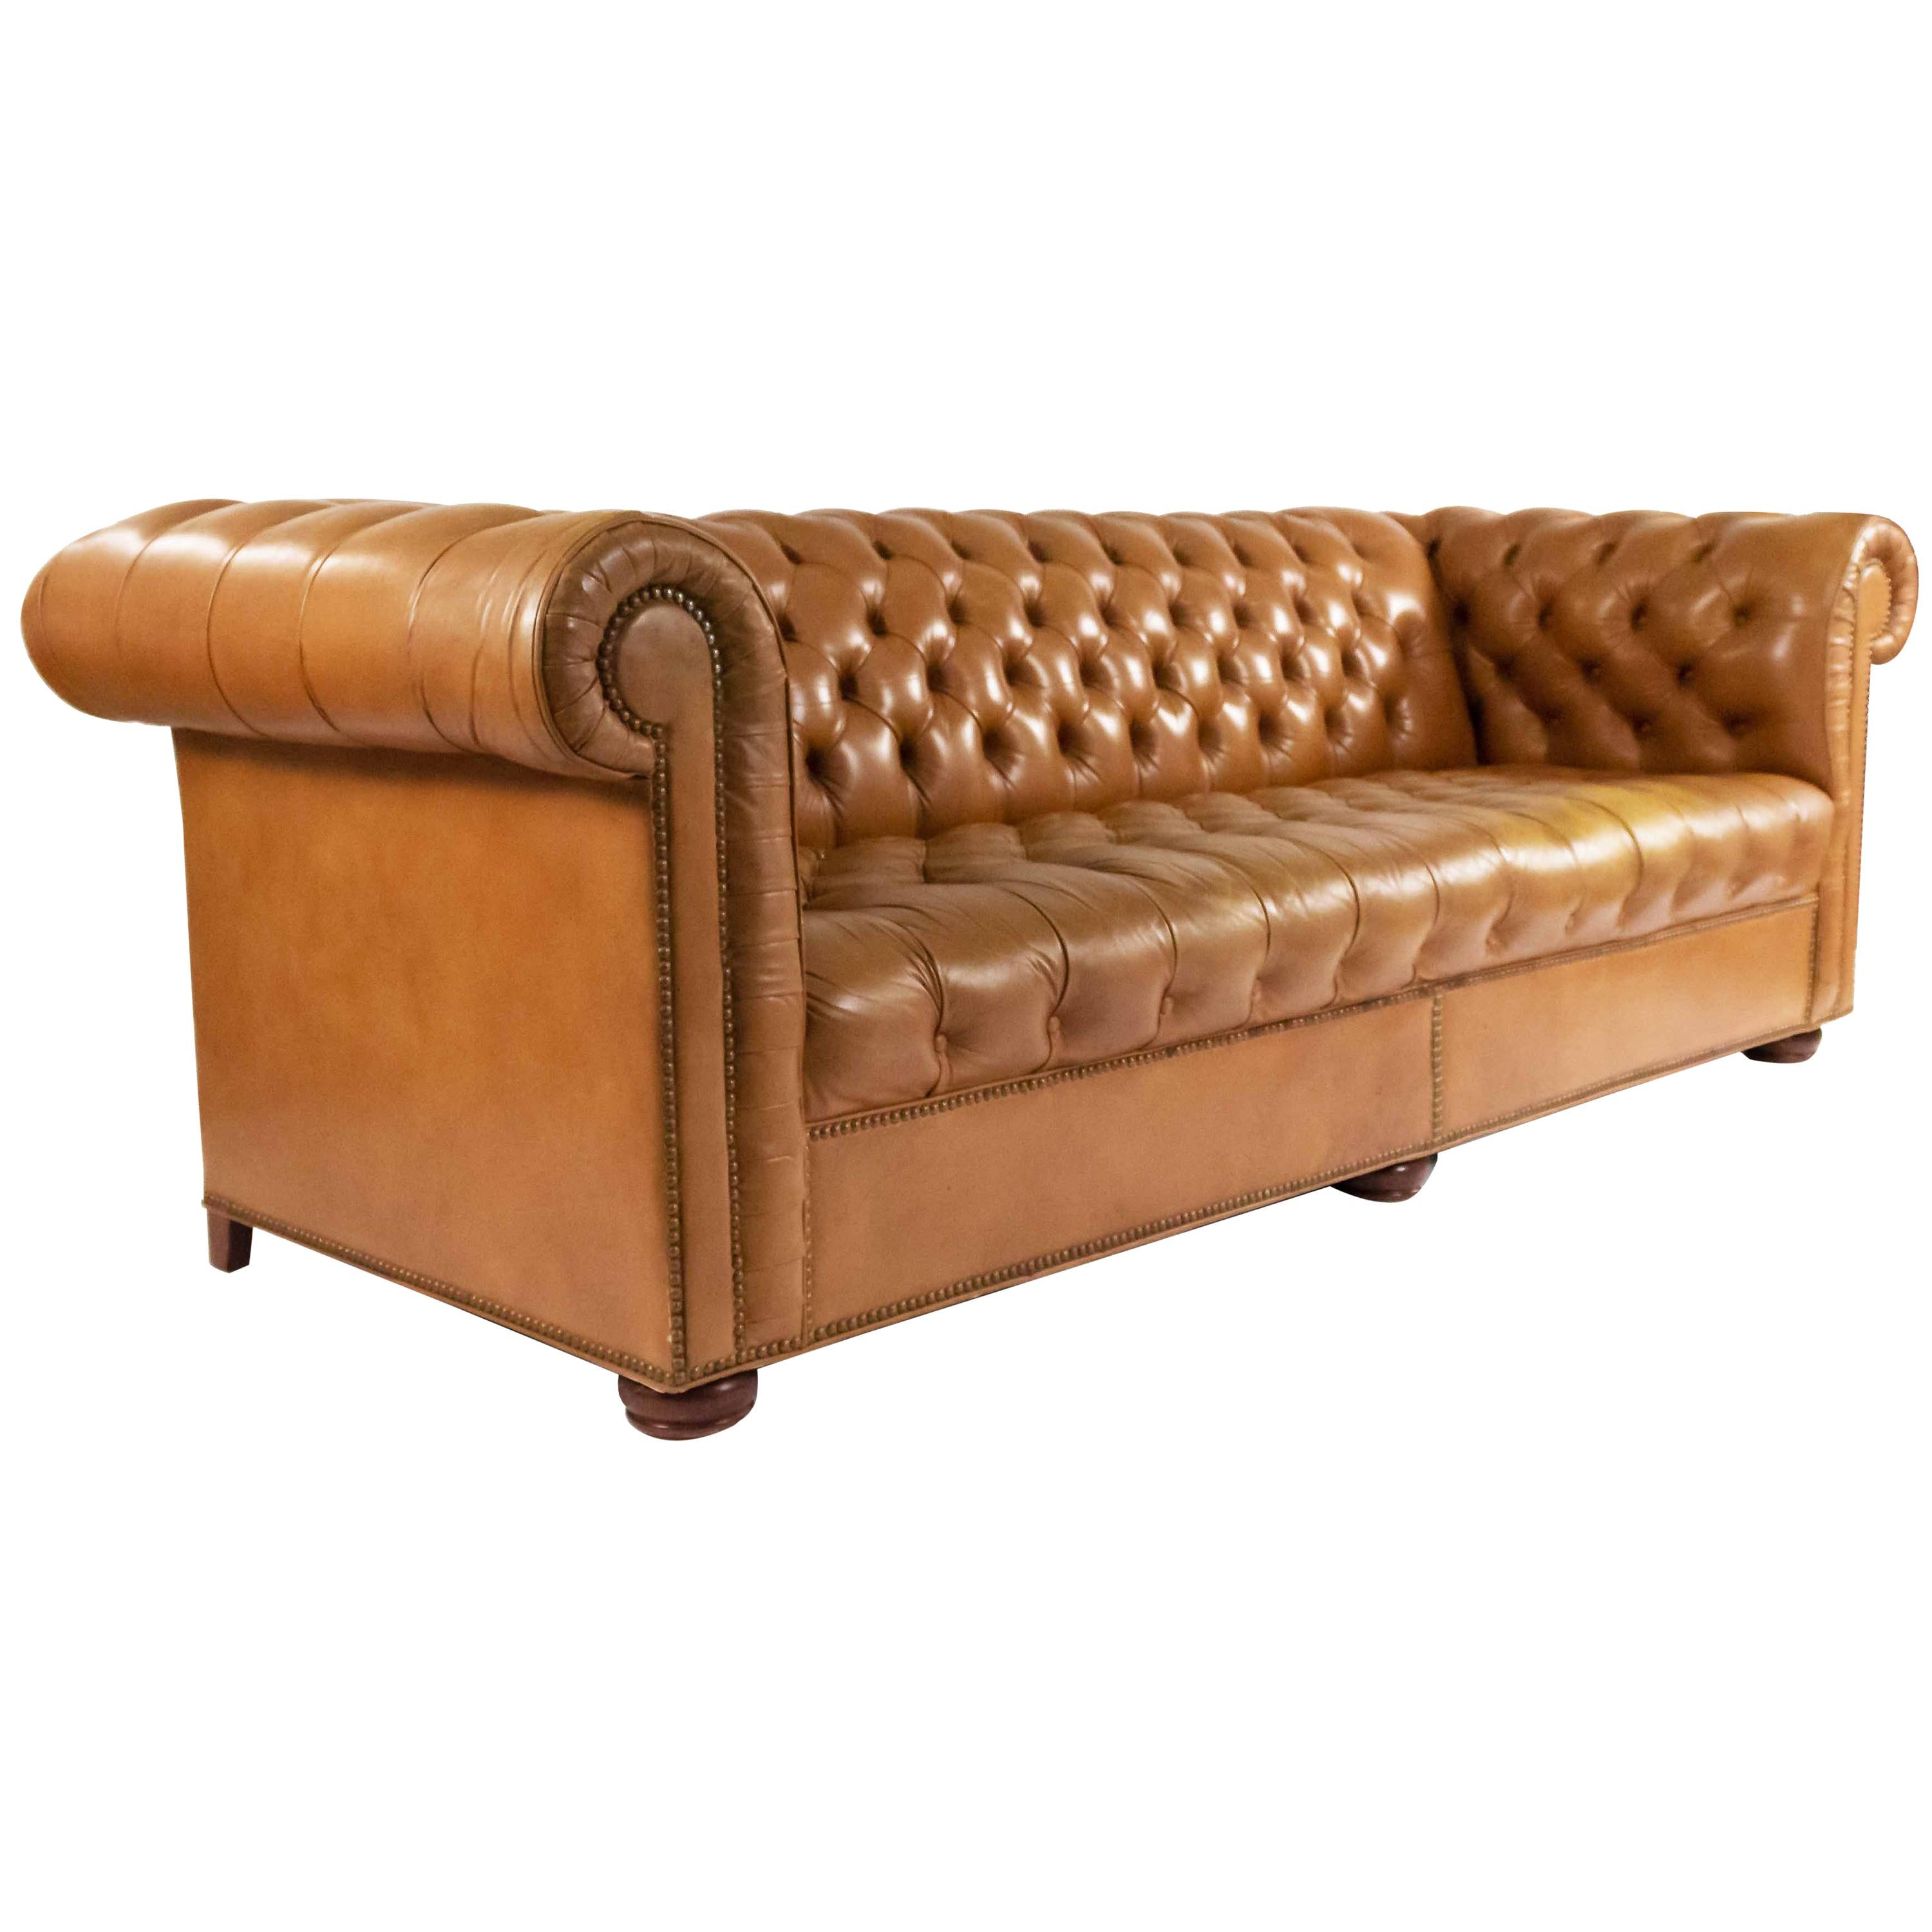 Brown Leather Chesterfield Sofa, Chesterfield Leather Sectional